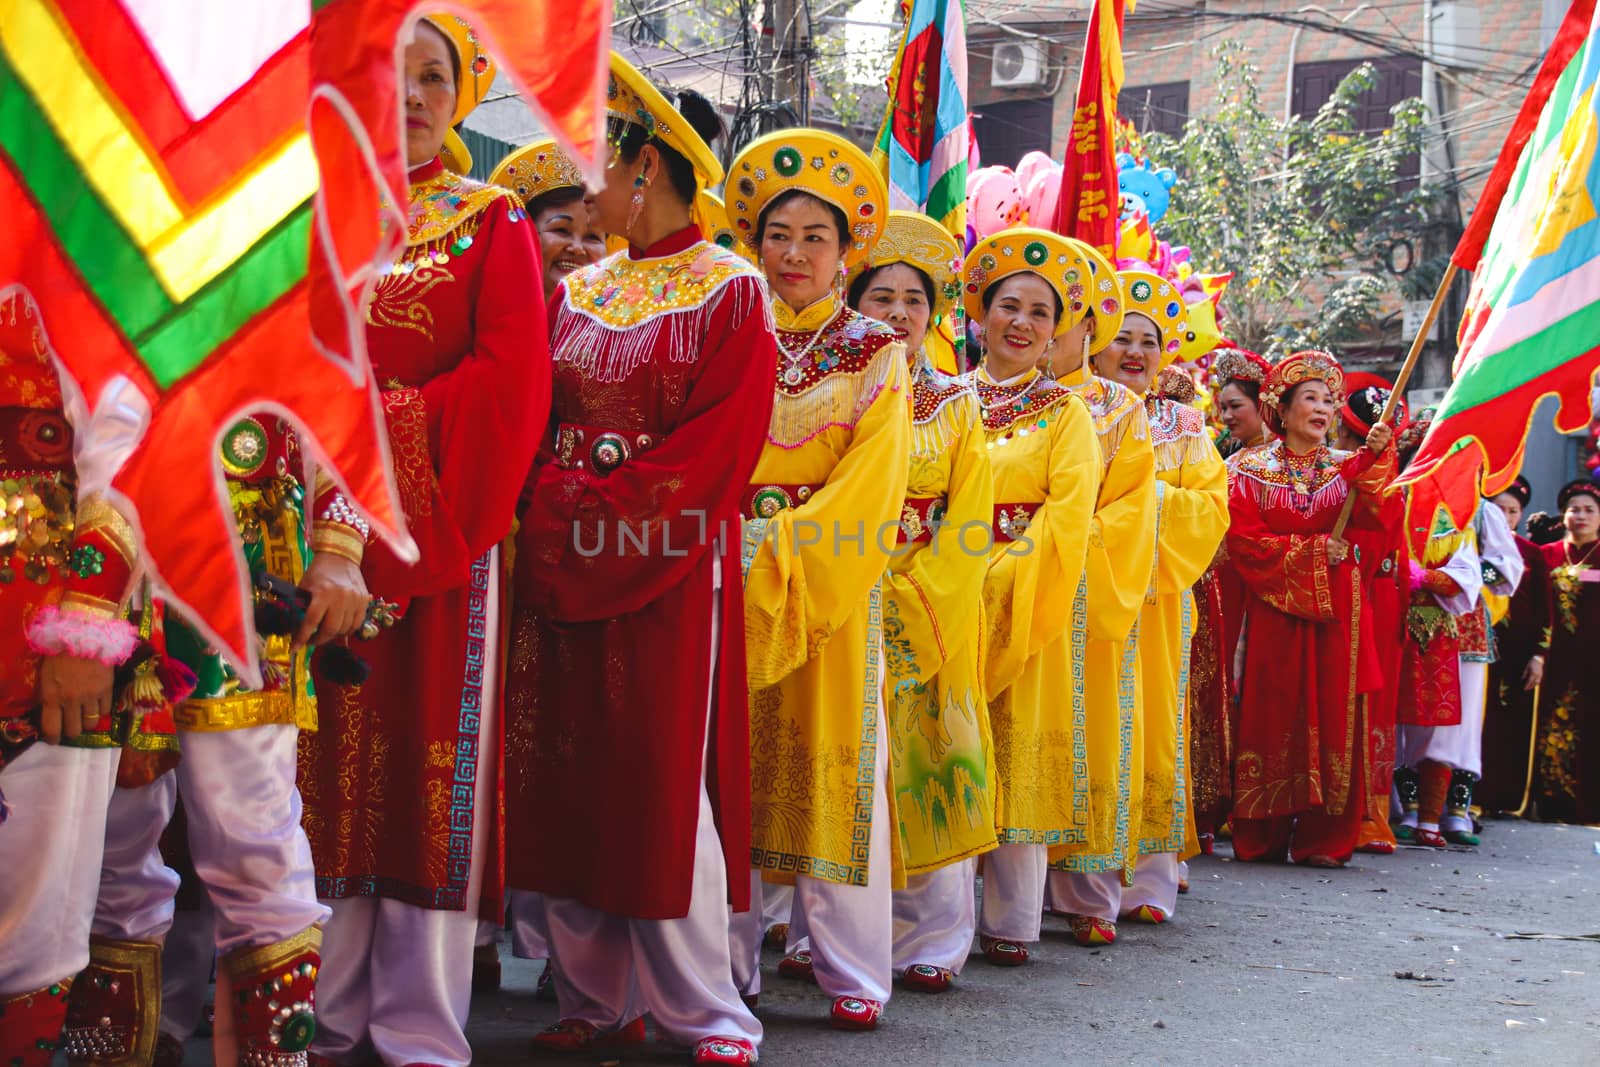 Street parade during the celebration of Dong Ky Firecracker Festival in Bac Ninh, Vietnam